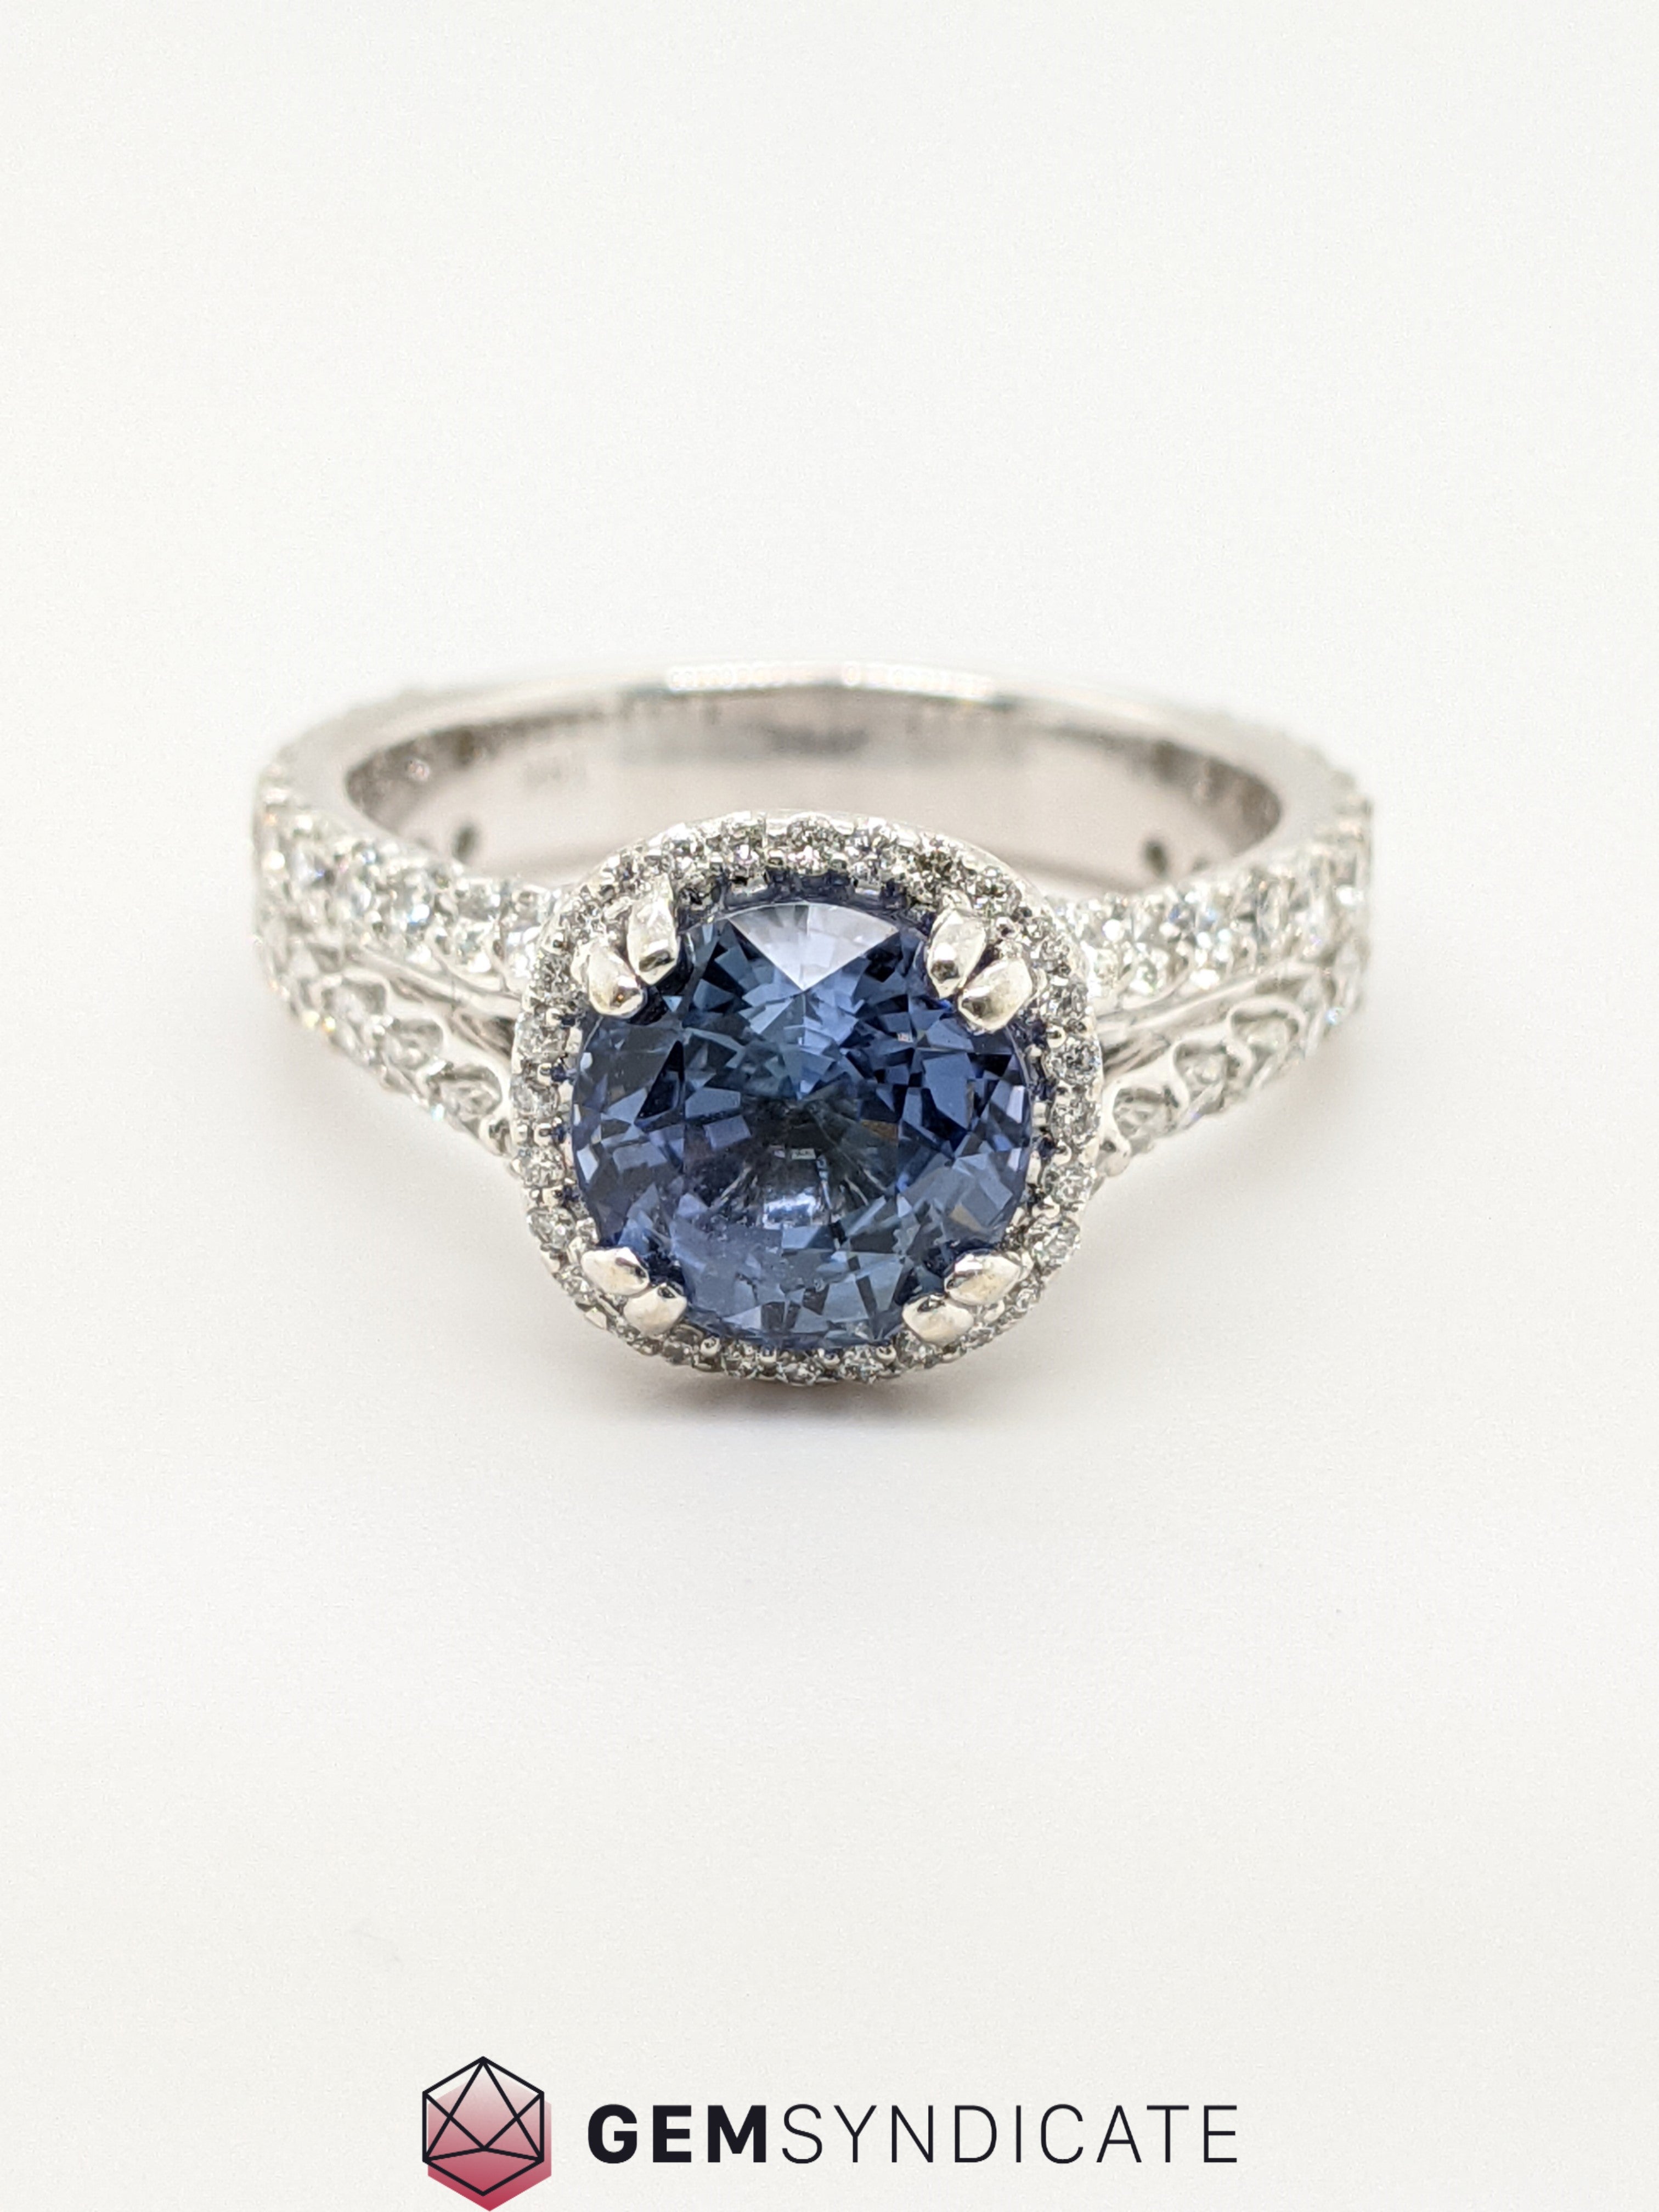 Show-Stopping Blue Sapphire Halo Ring in 14k White Gold